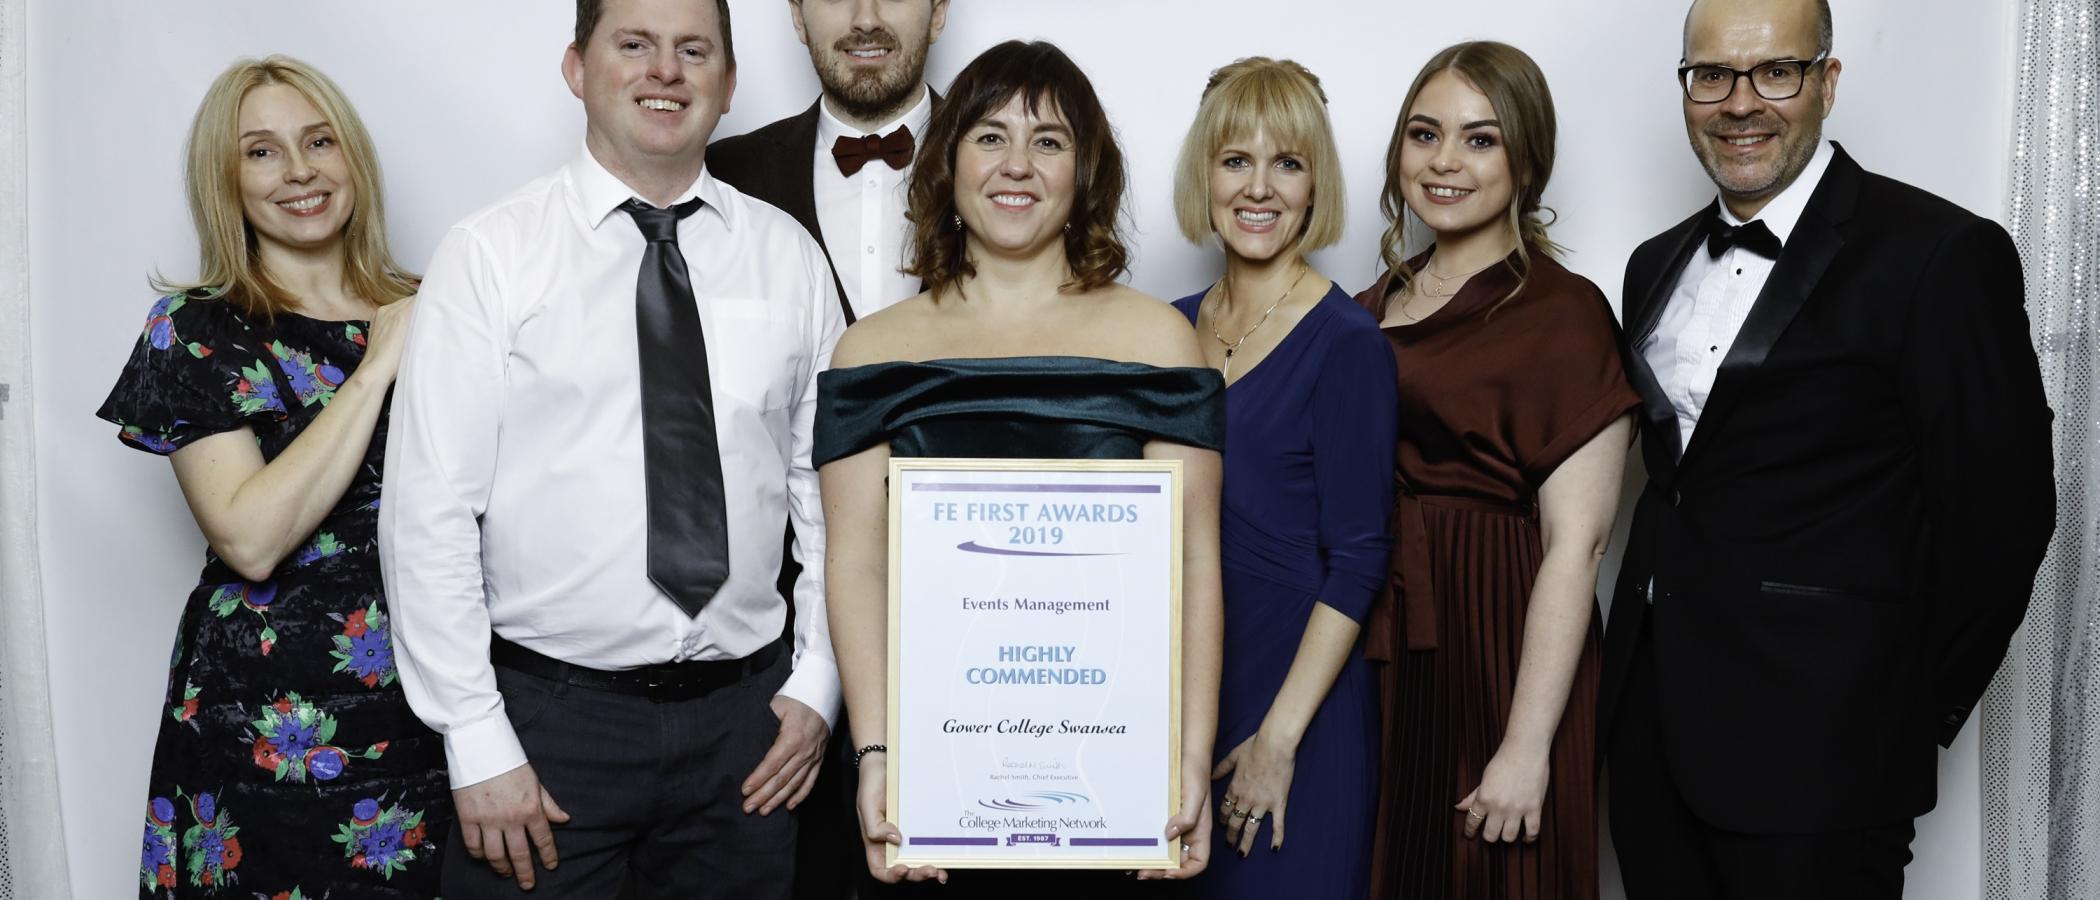 College event ‘highly commended’ at national awards ceremony 